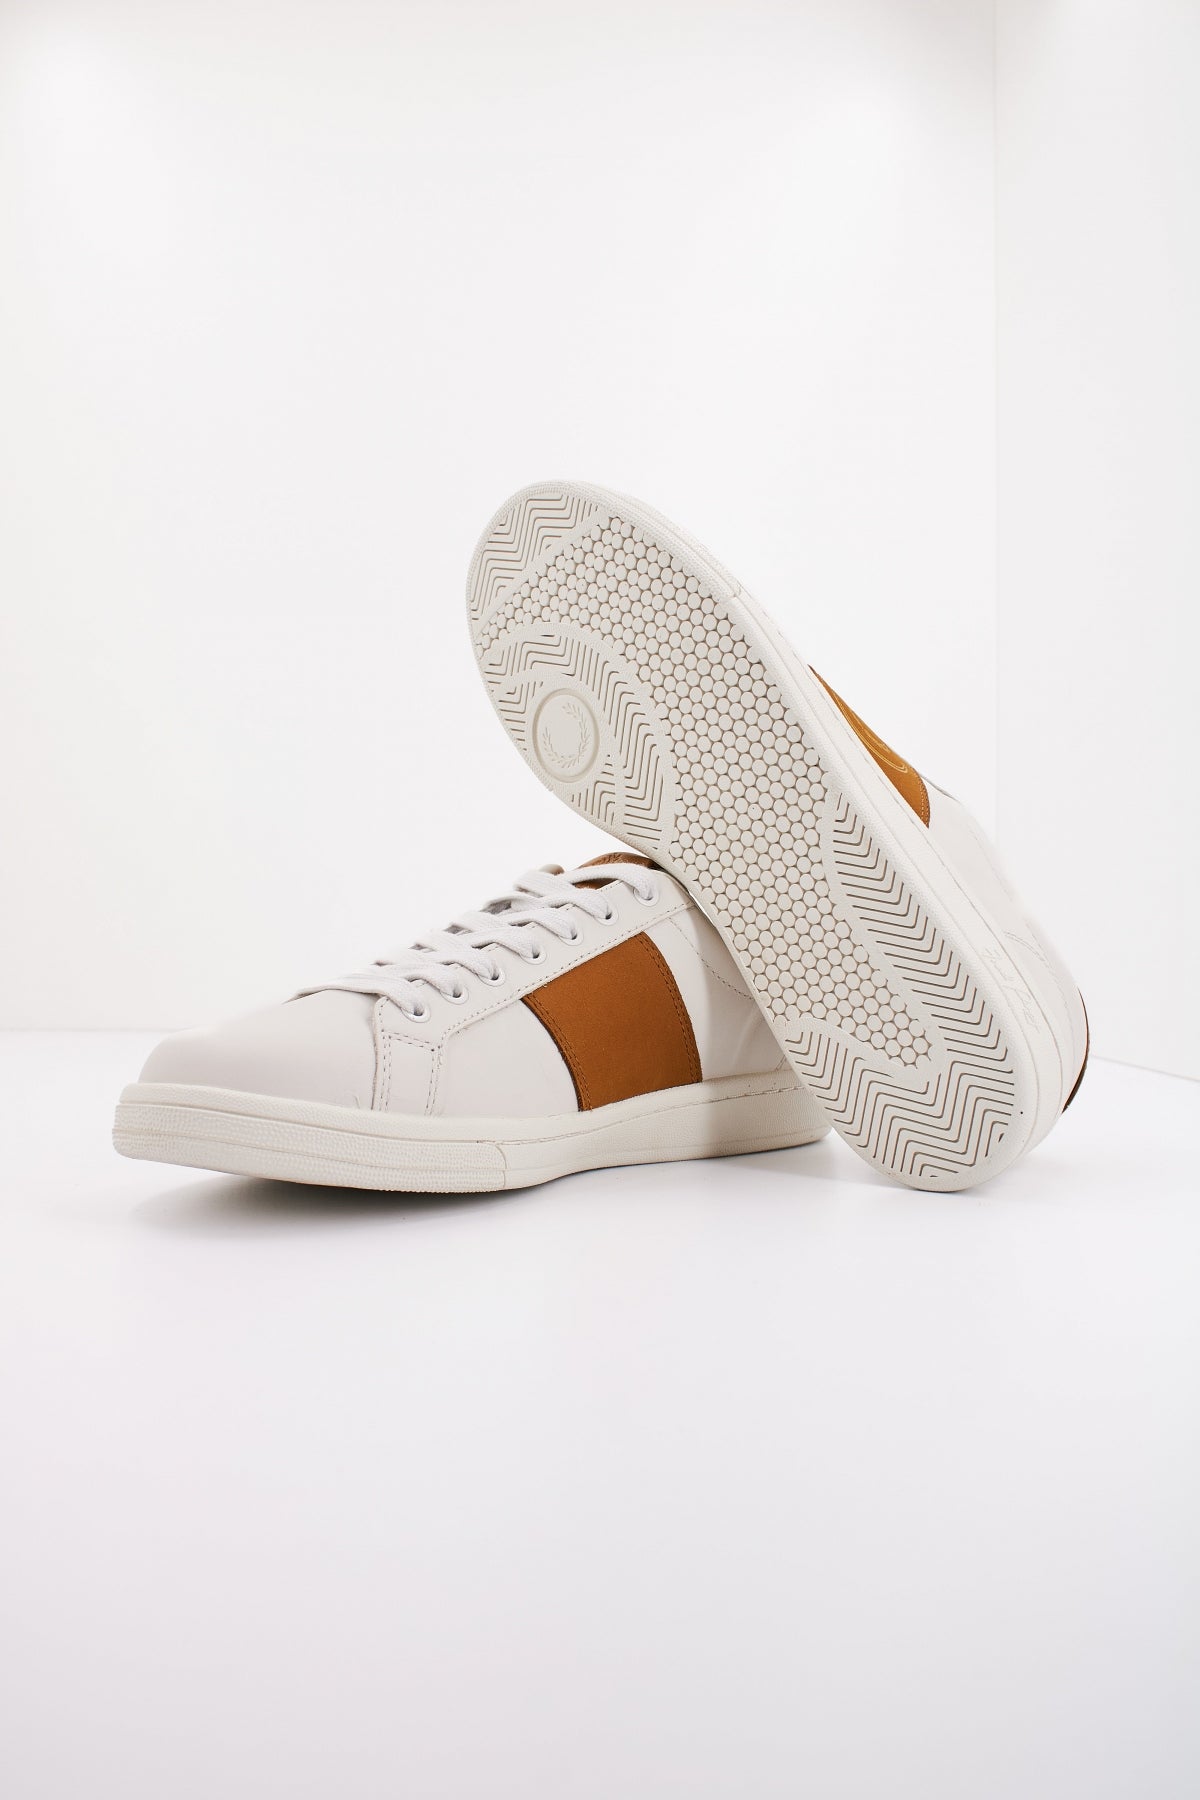 FRED PERRY B LEATHER/BRANDE en color BLANCO  (4)